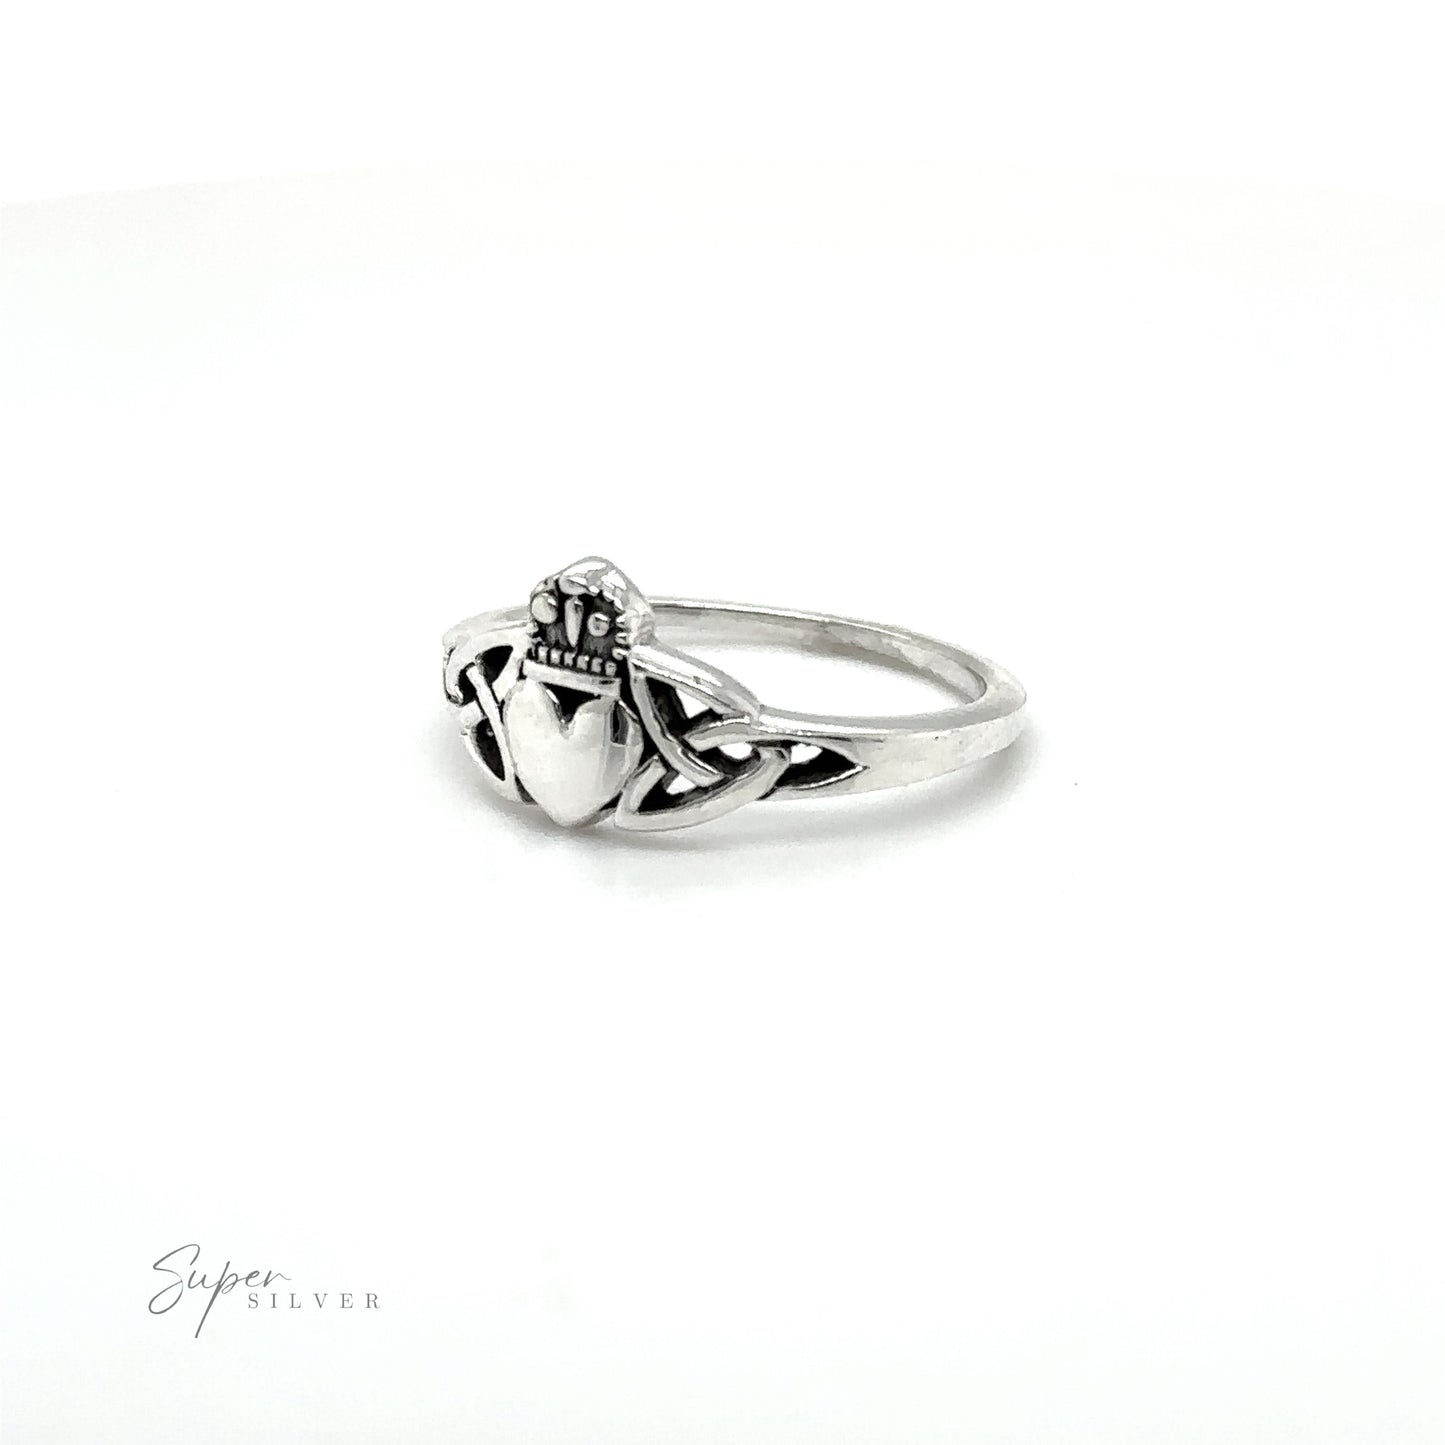 An .925 sterling silver Celtic Knot Claddagh Ring with a heart on it, inspired by Irish culture.